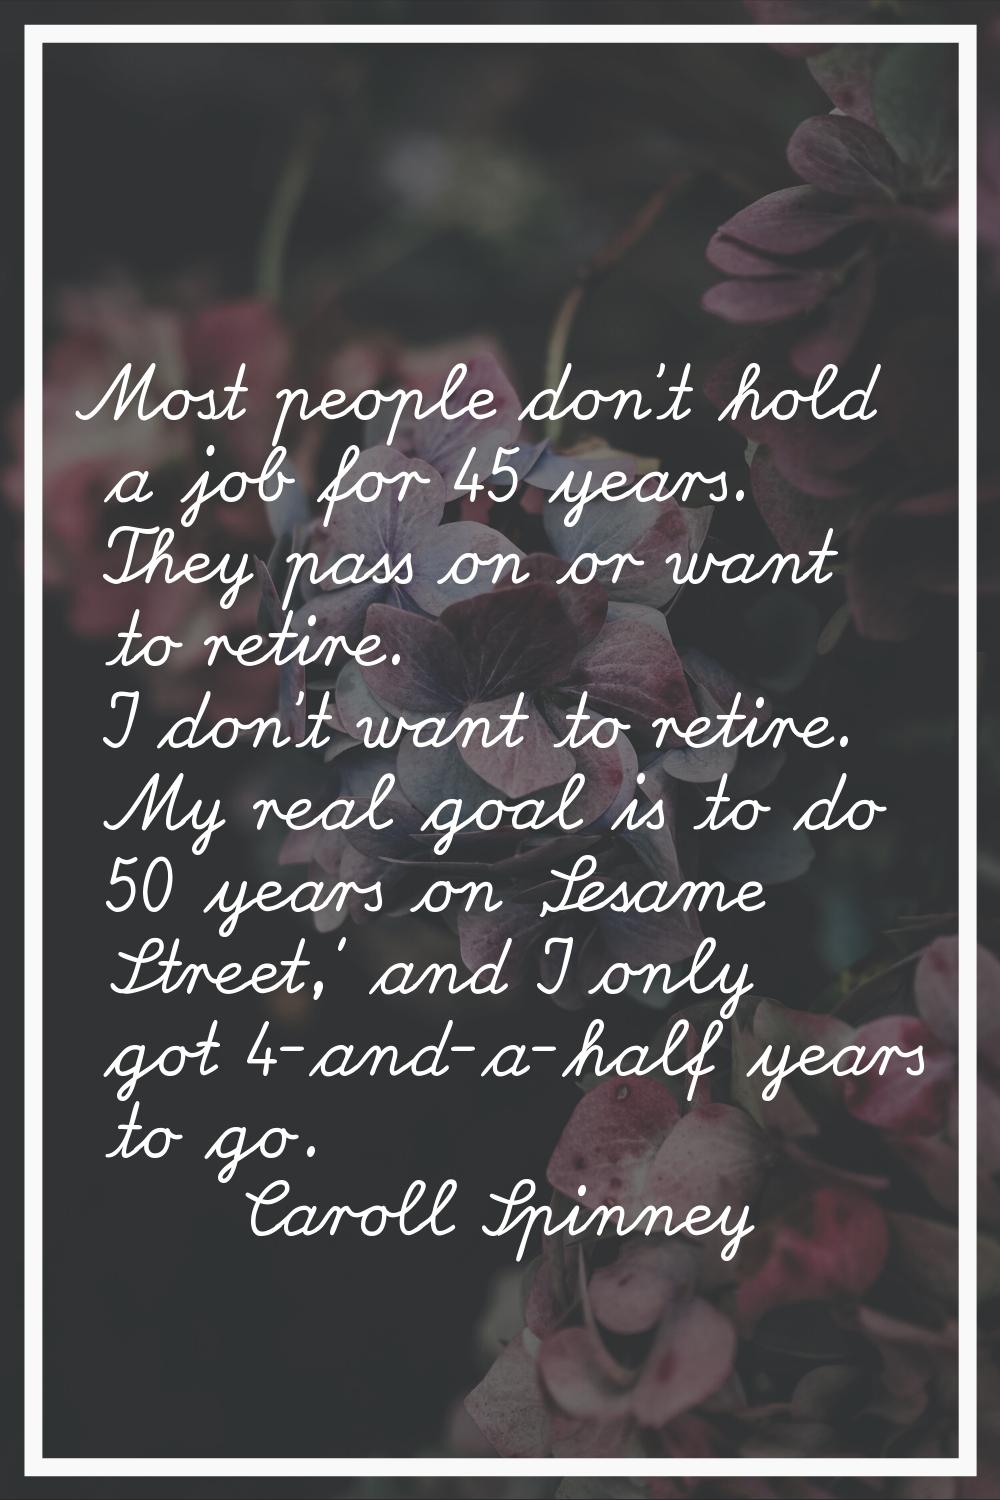 Most people don't hold a job for 45 years. They pass on or want to retire. I don't want to retire. 